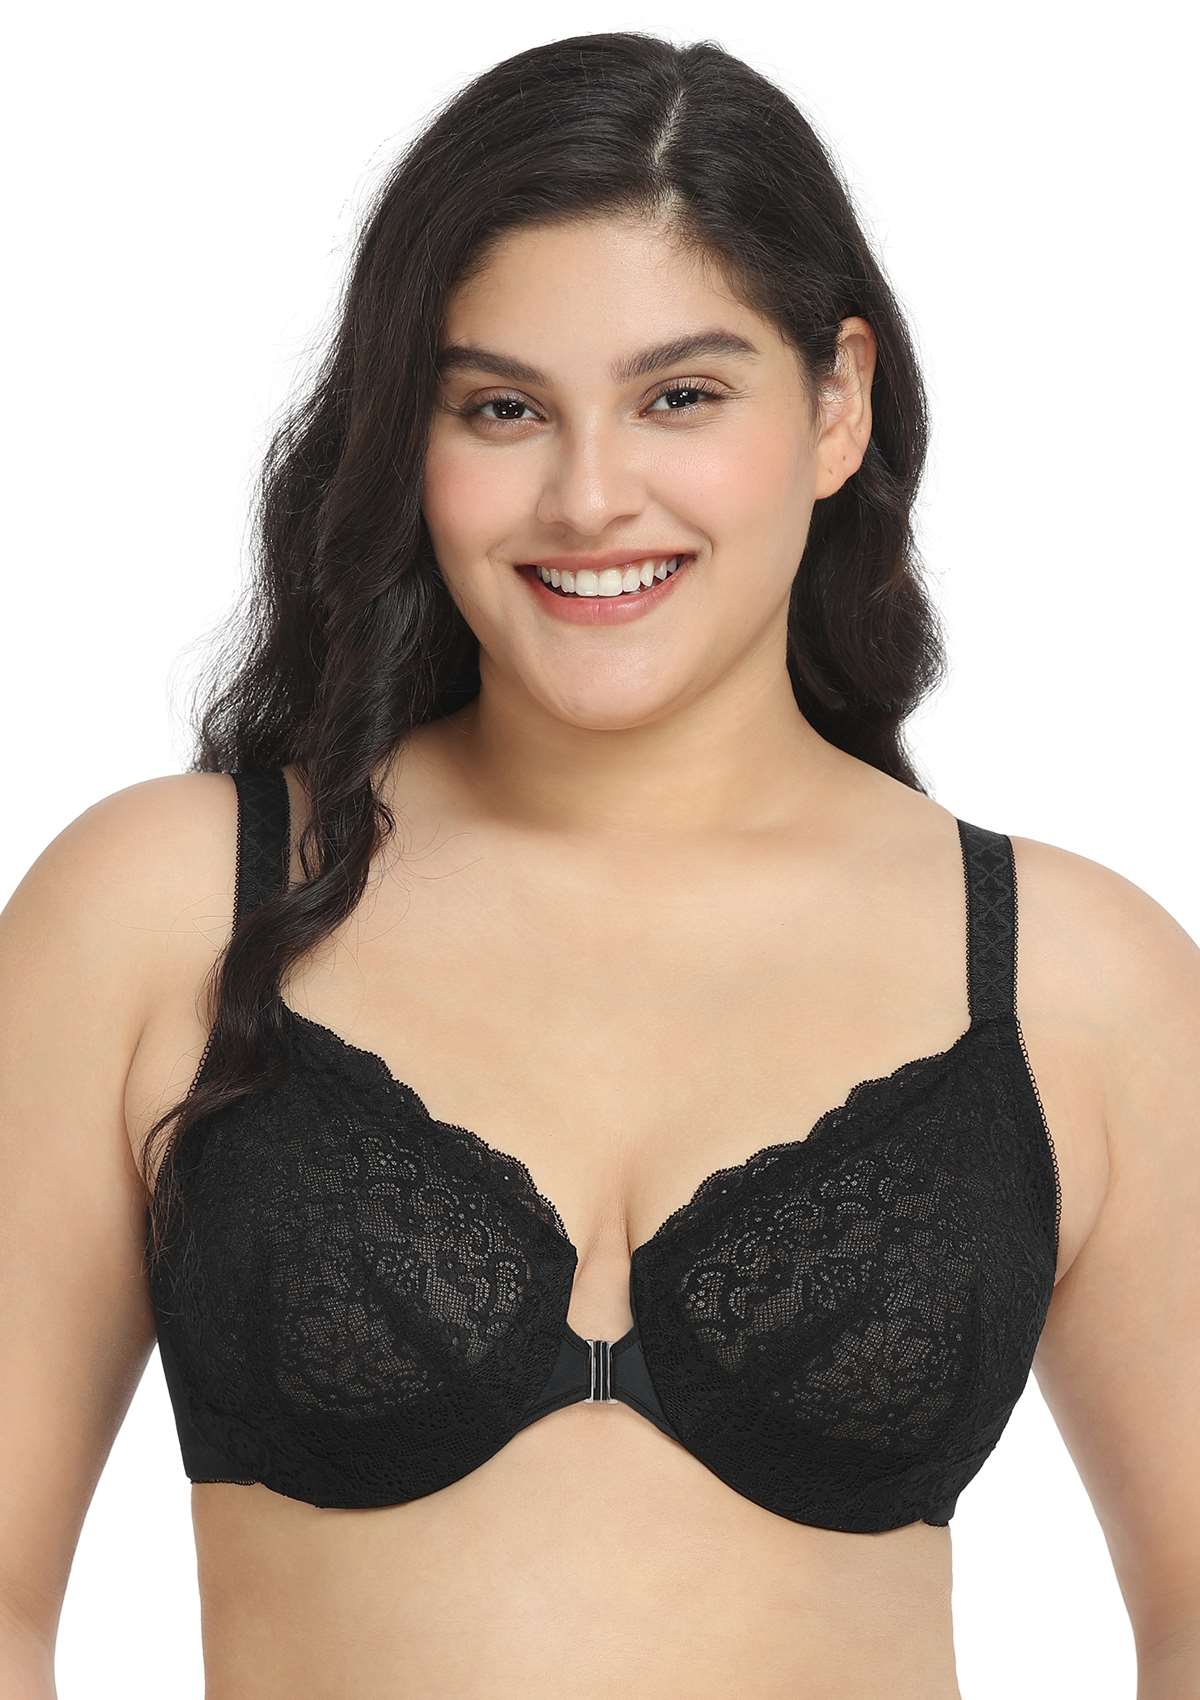 HSIA Nymphaea Front-Close Unlined Retro Floral Lace Back Smoothing Bra - Black / 36 / H